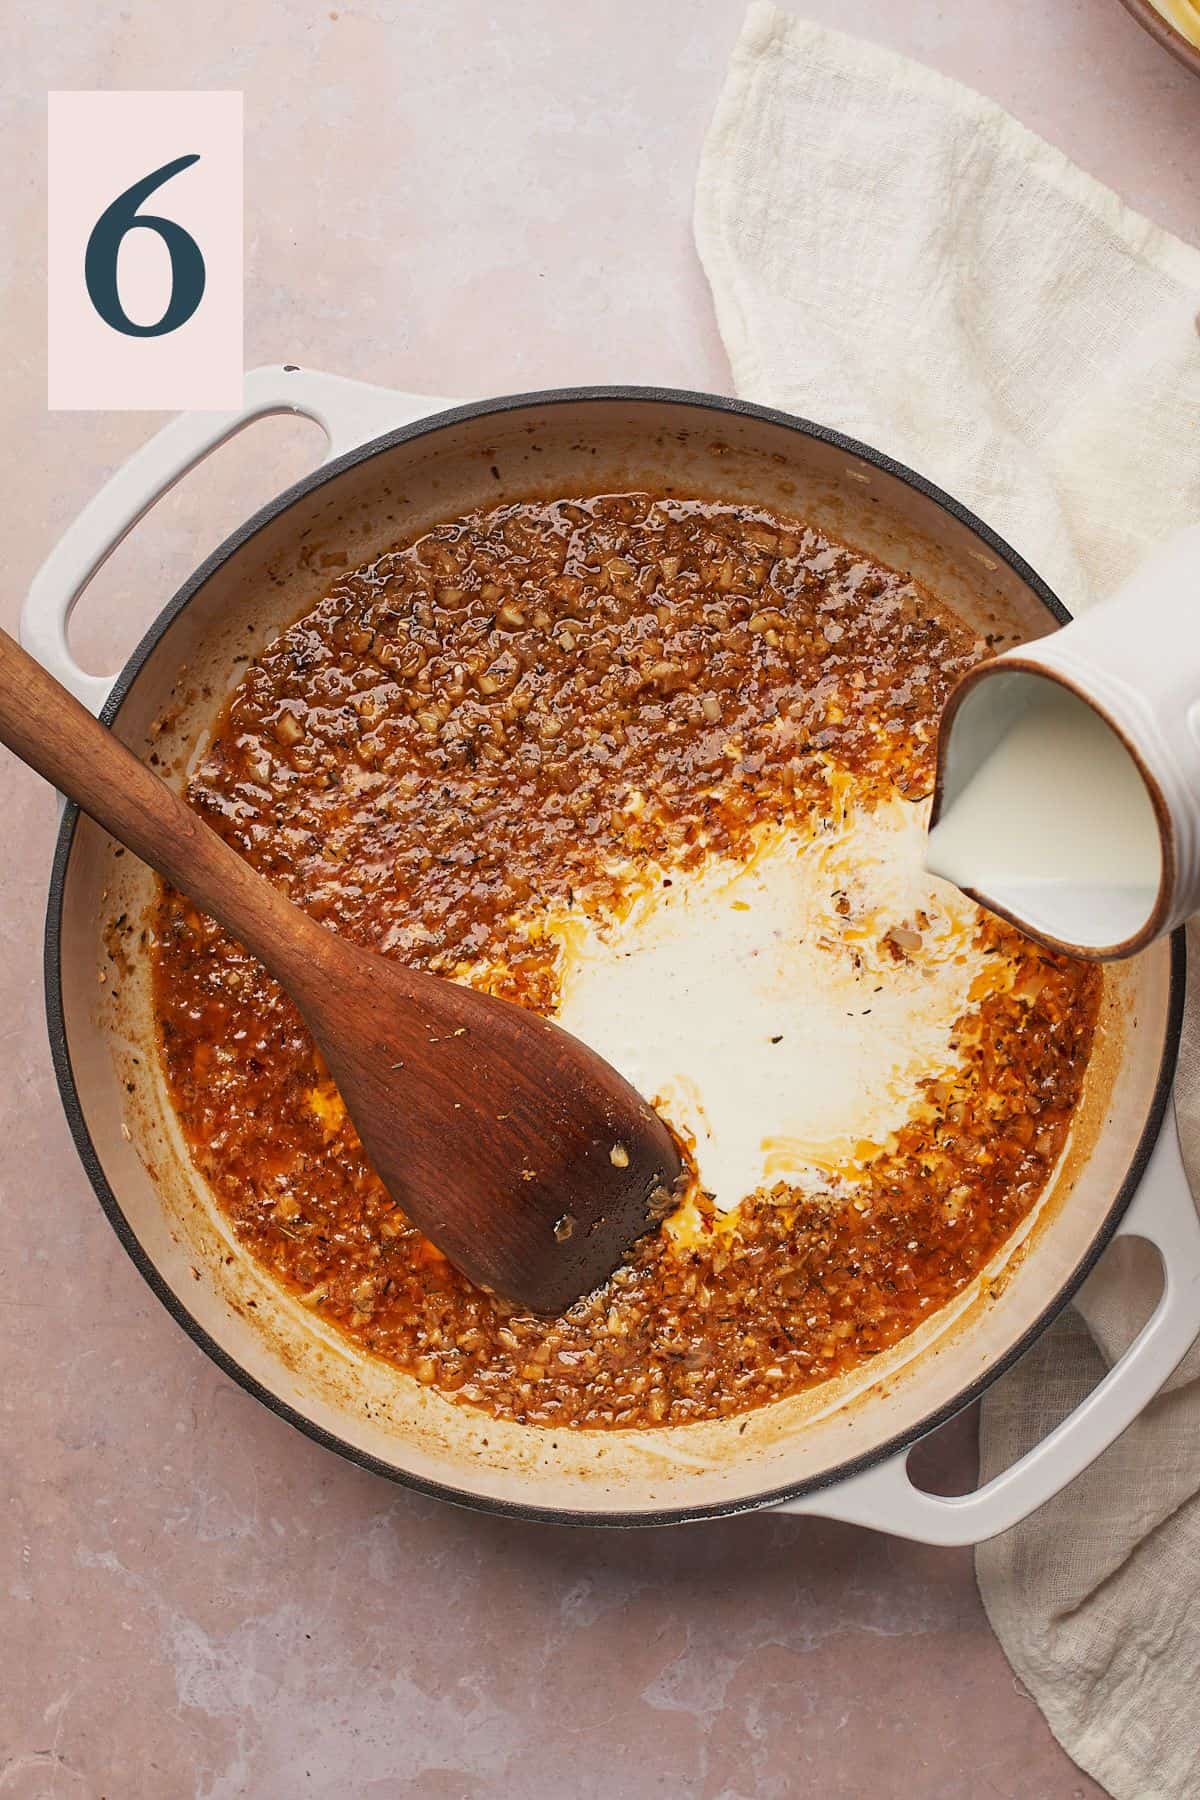 pouring cream into an enameled cast iron skillet with cooked onions, garlic and seasonings.